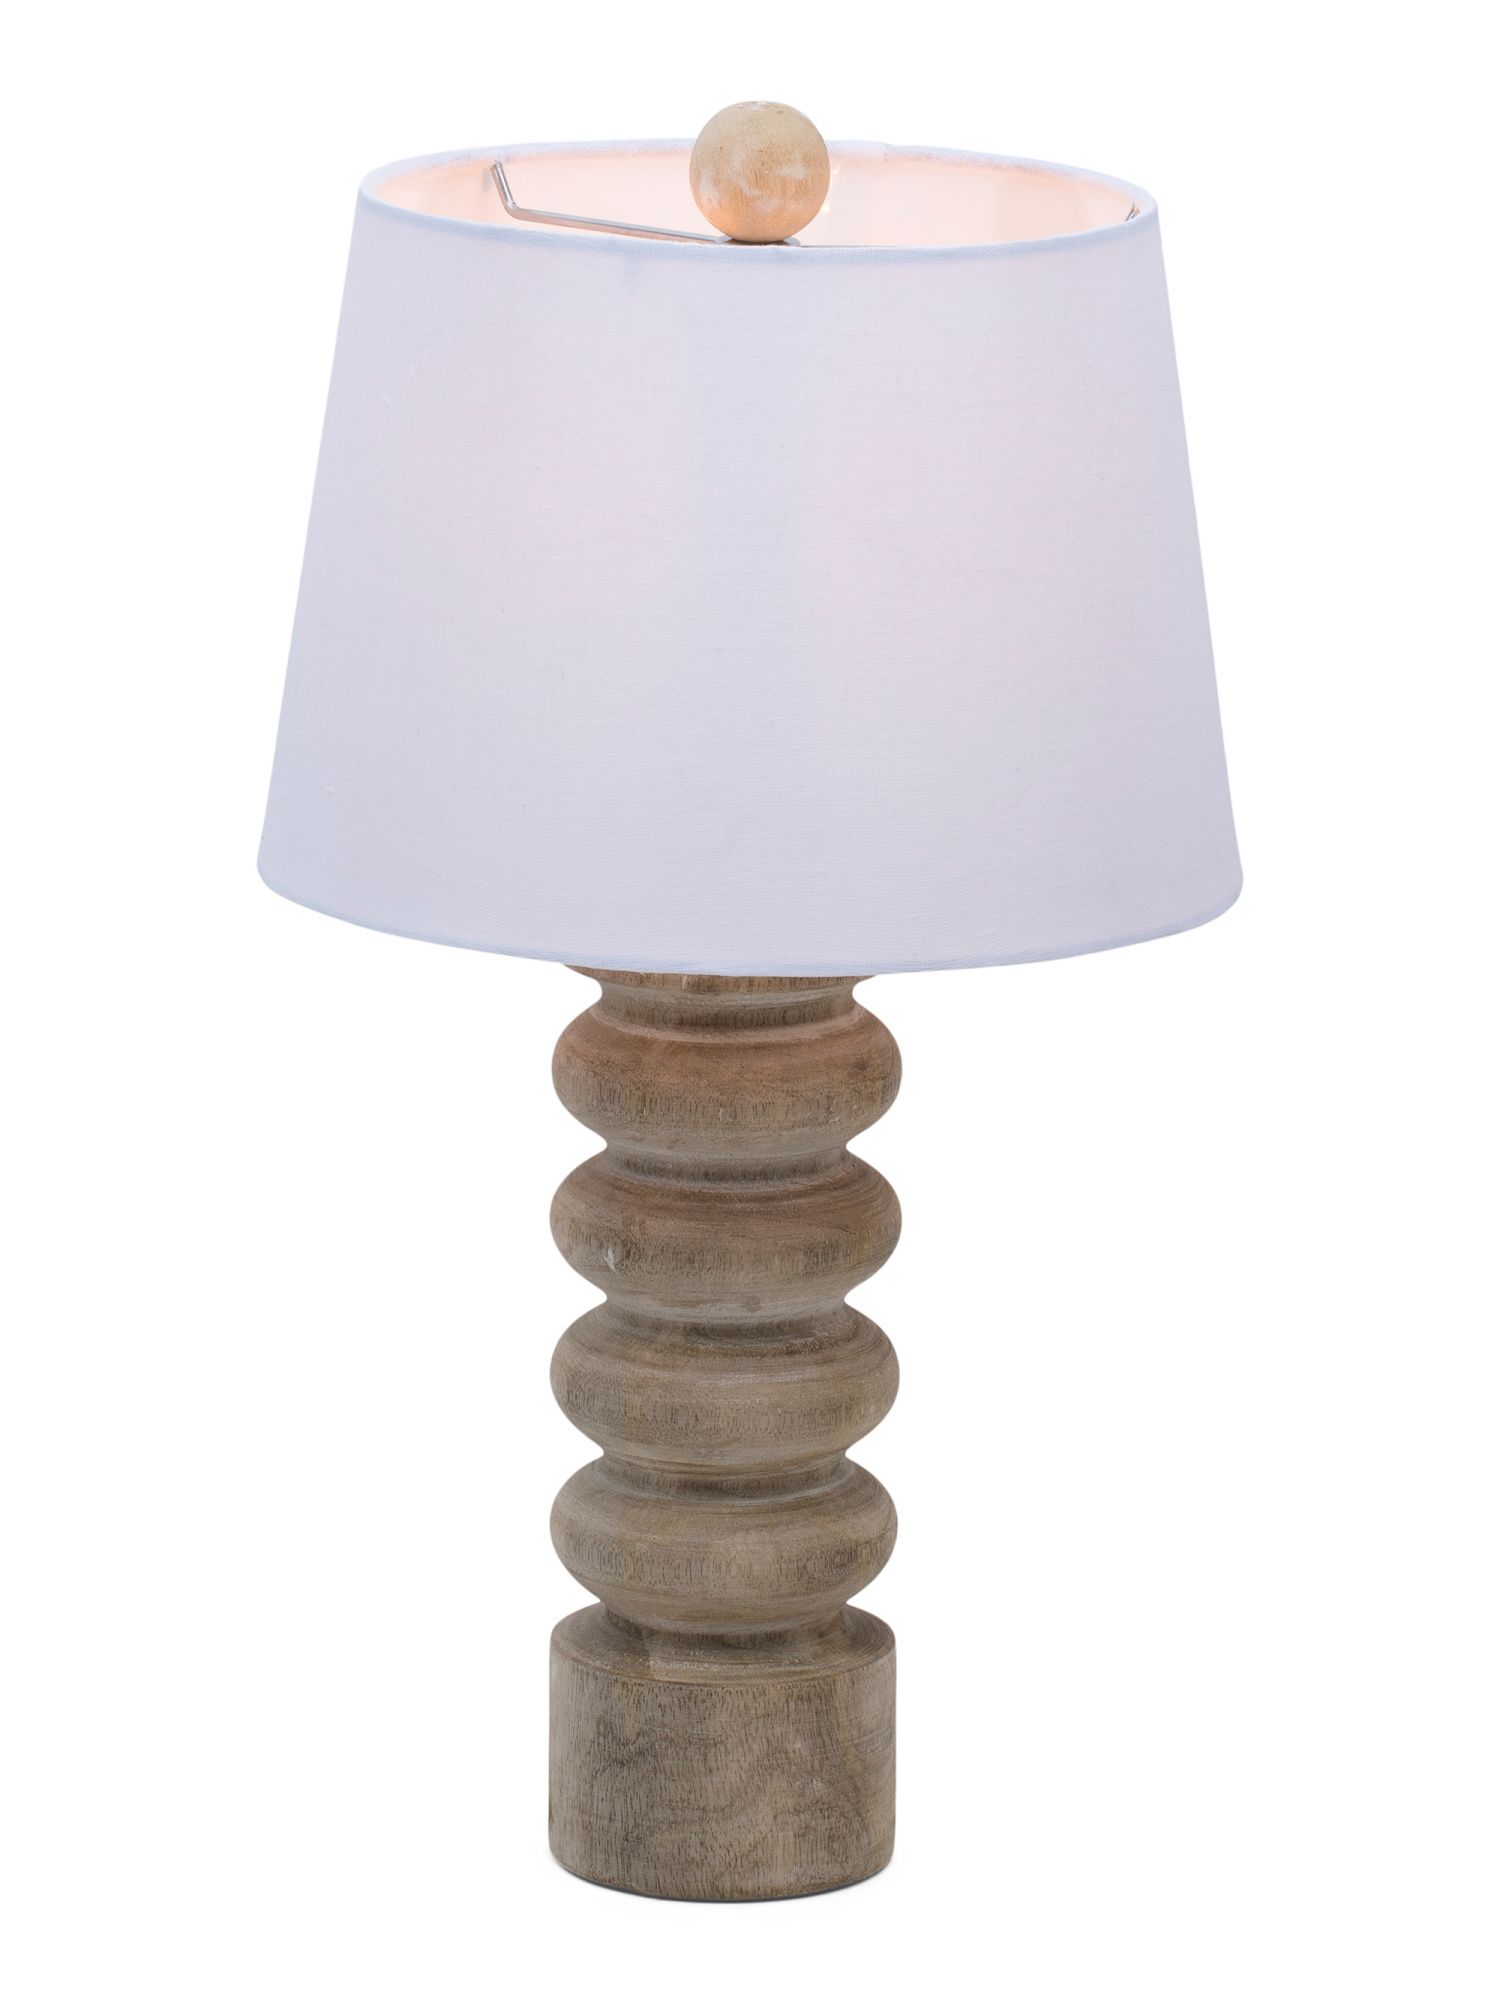 19in Wooden Table Lamp | The Global Decor Shop | Marshalls | Marshalls